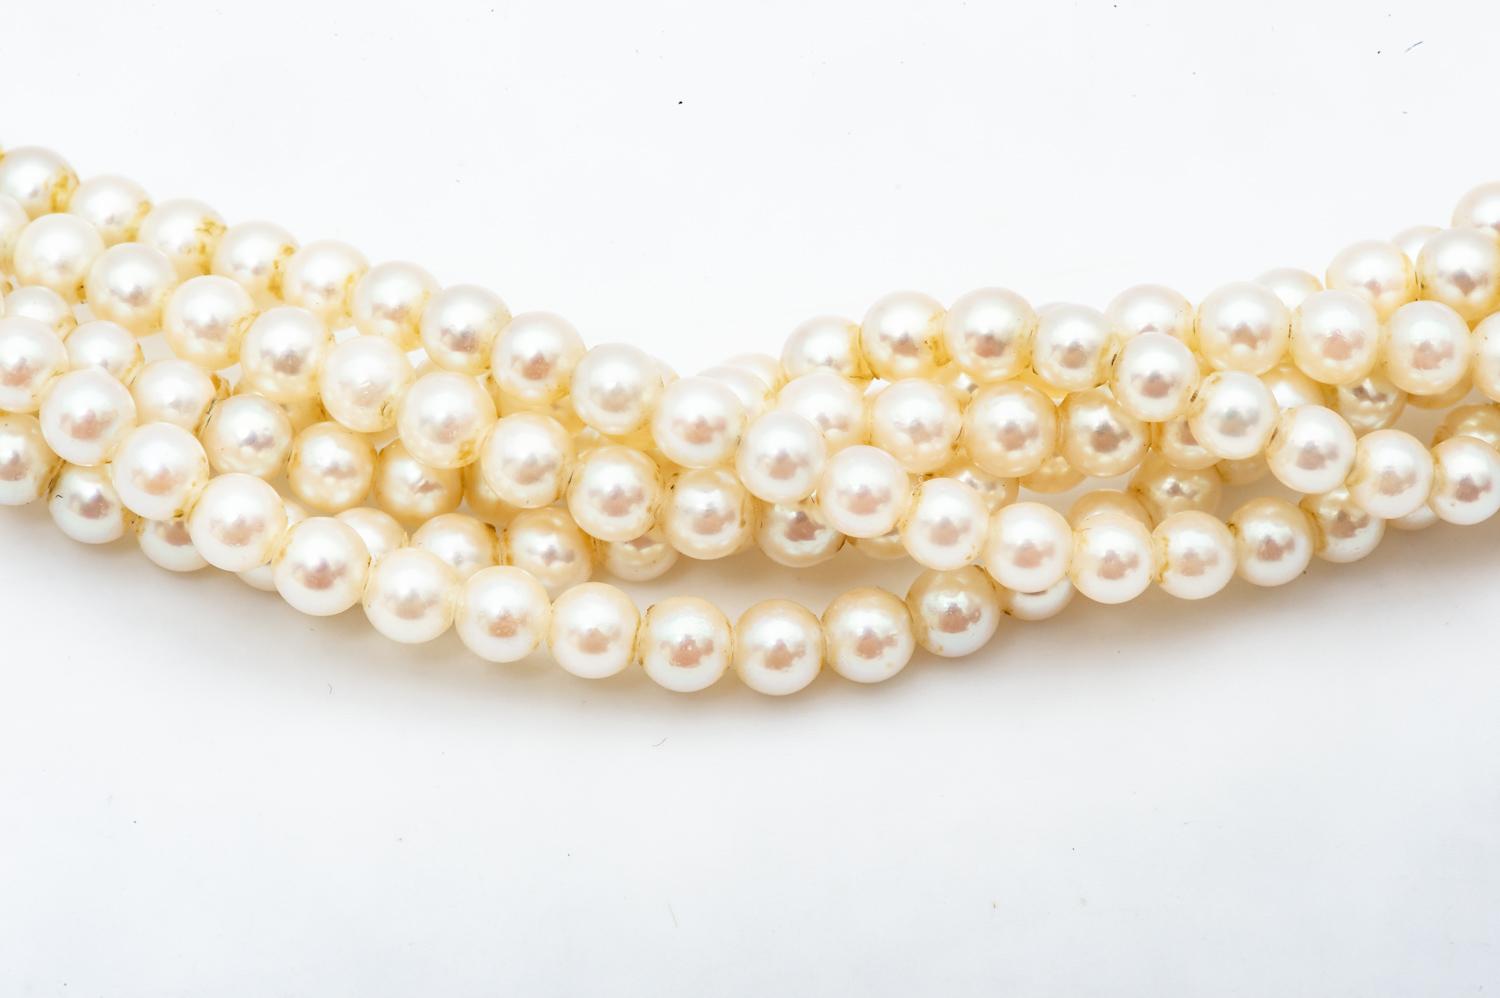 6 Row Cultured Pearls Necklace Yellow and White Gold 18 Karat In New Condition For Sale In Vannes, FR